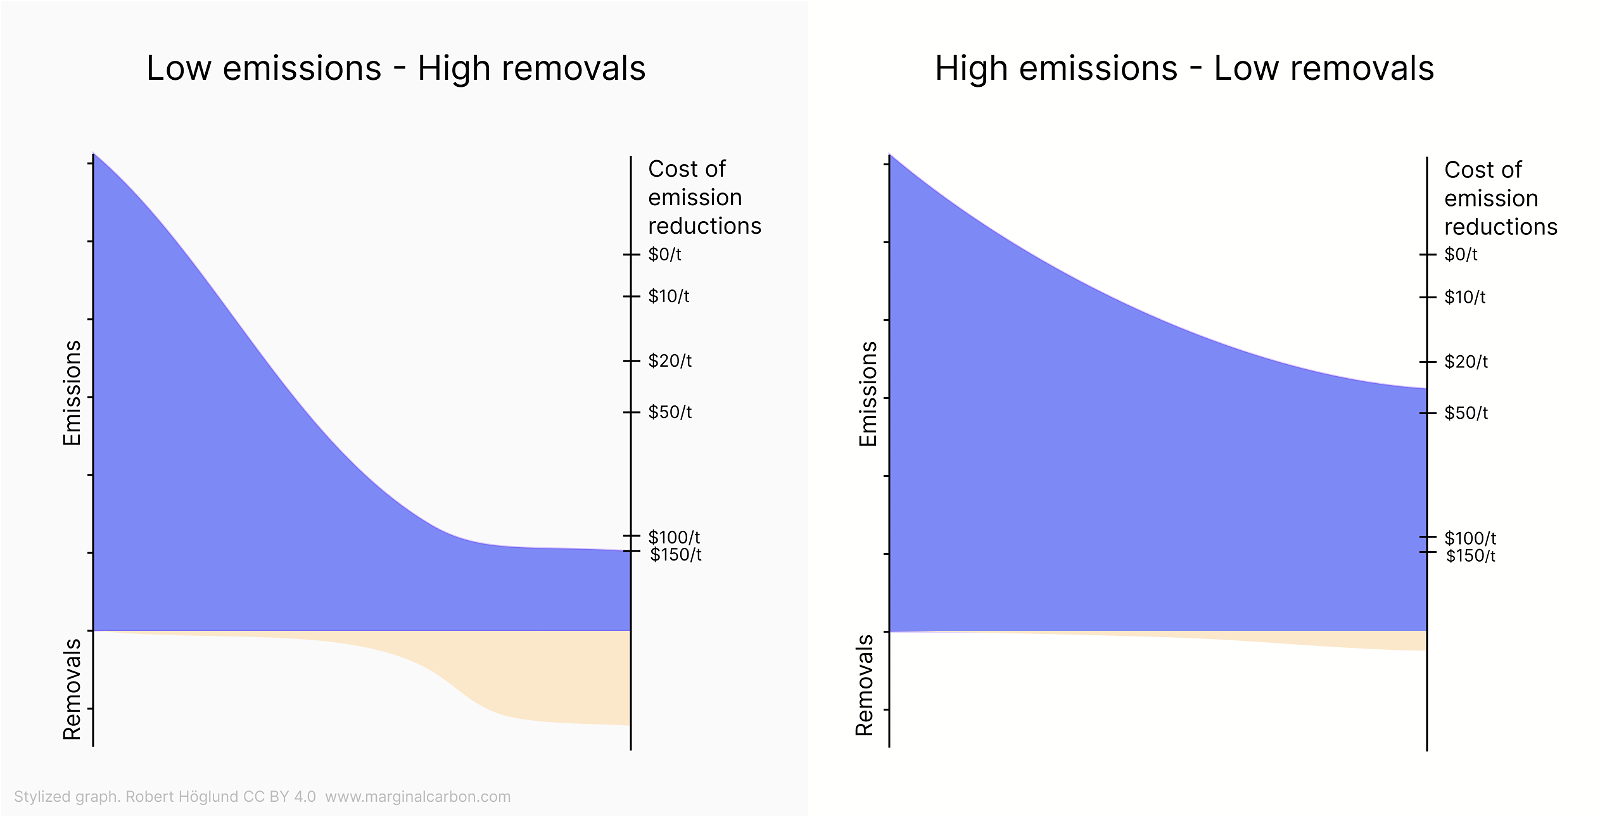 Stylized graph showing how a high emission scenario leads to low removals and vice versa